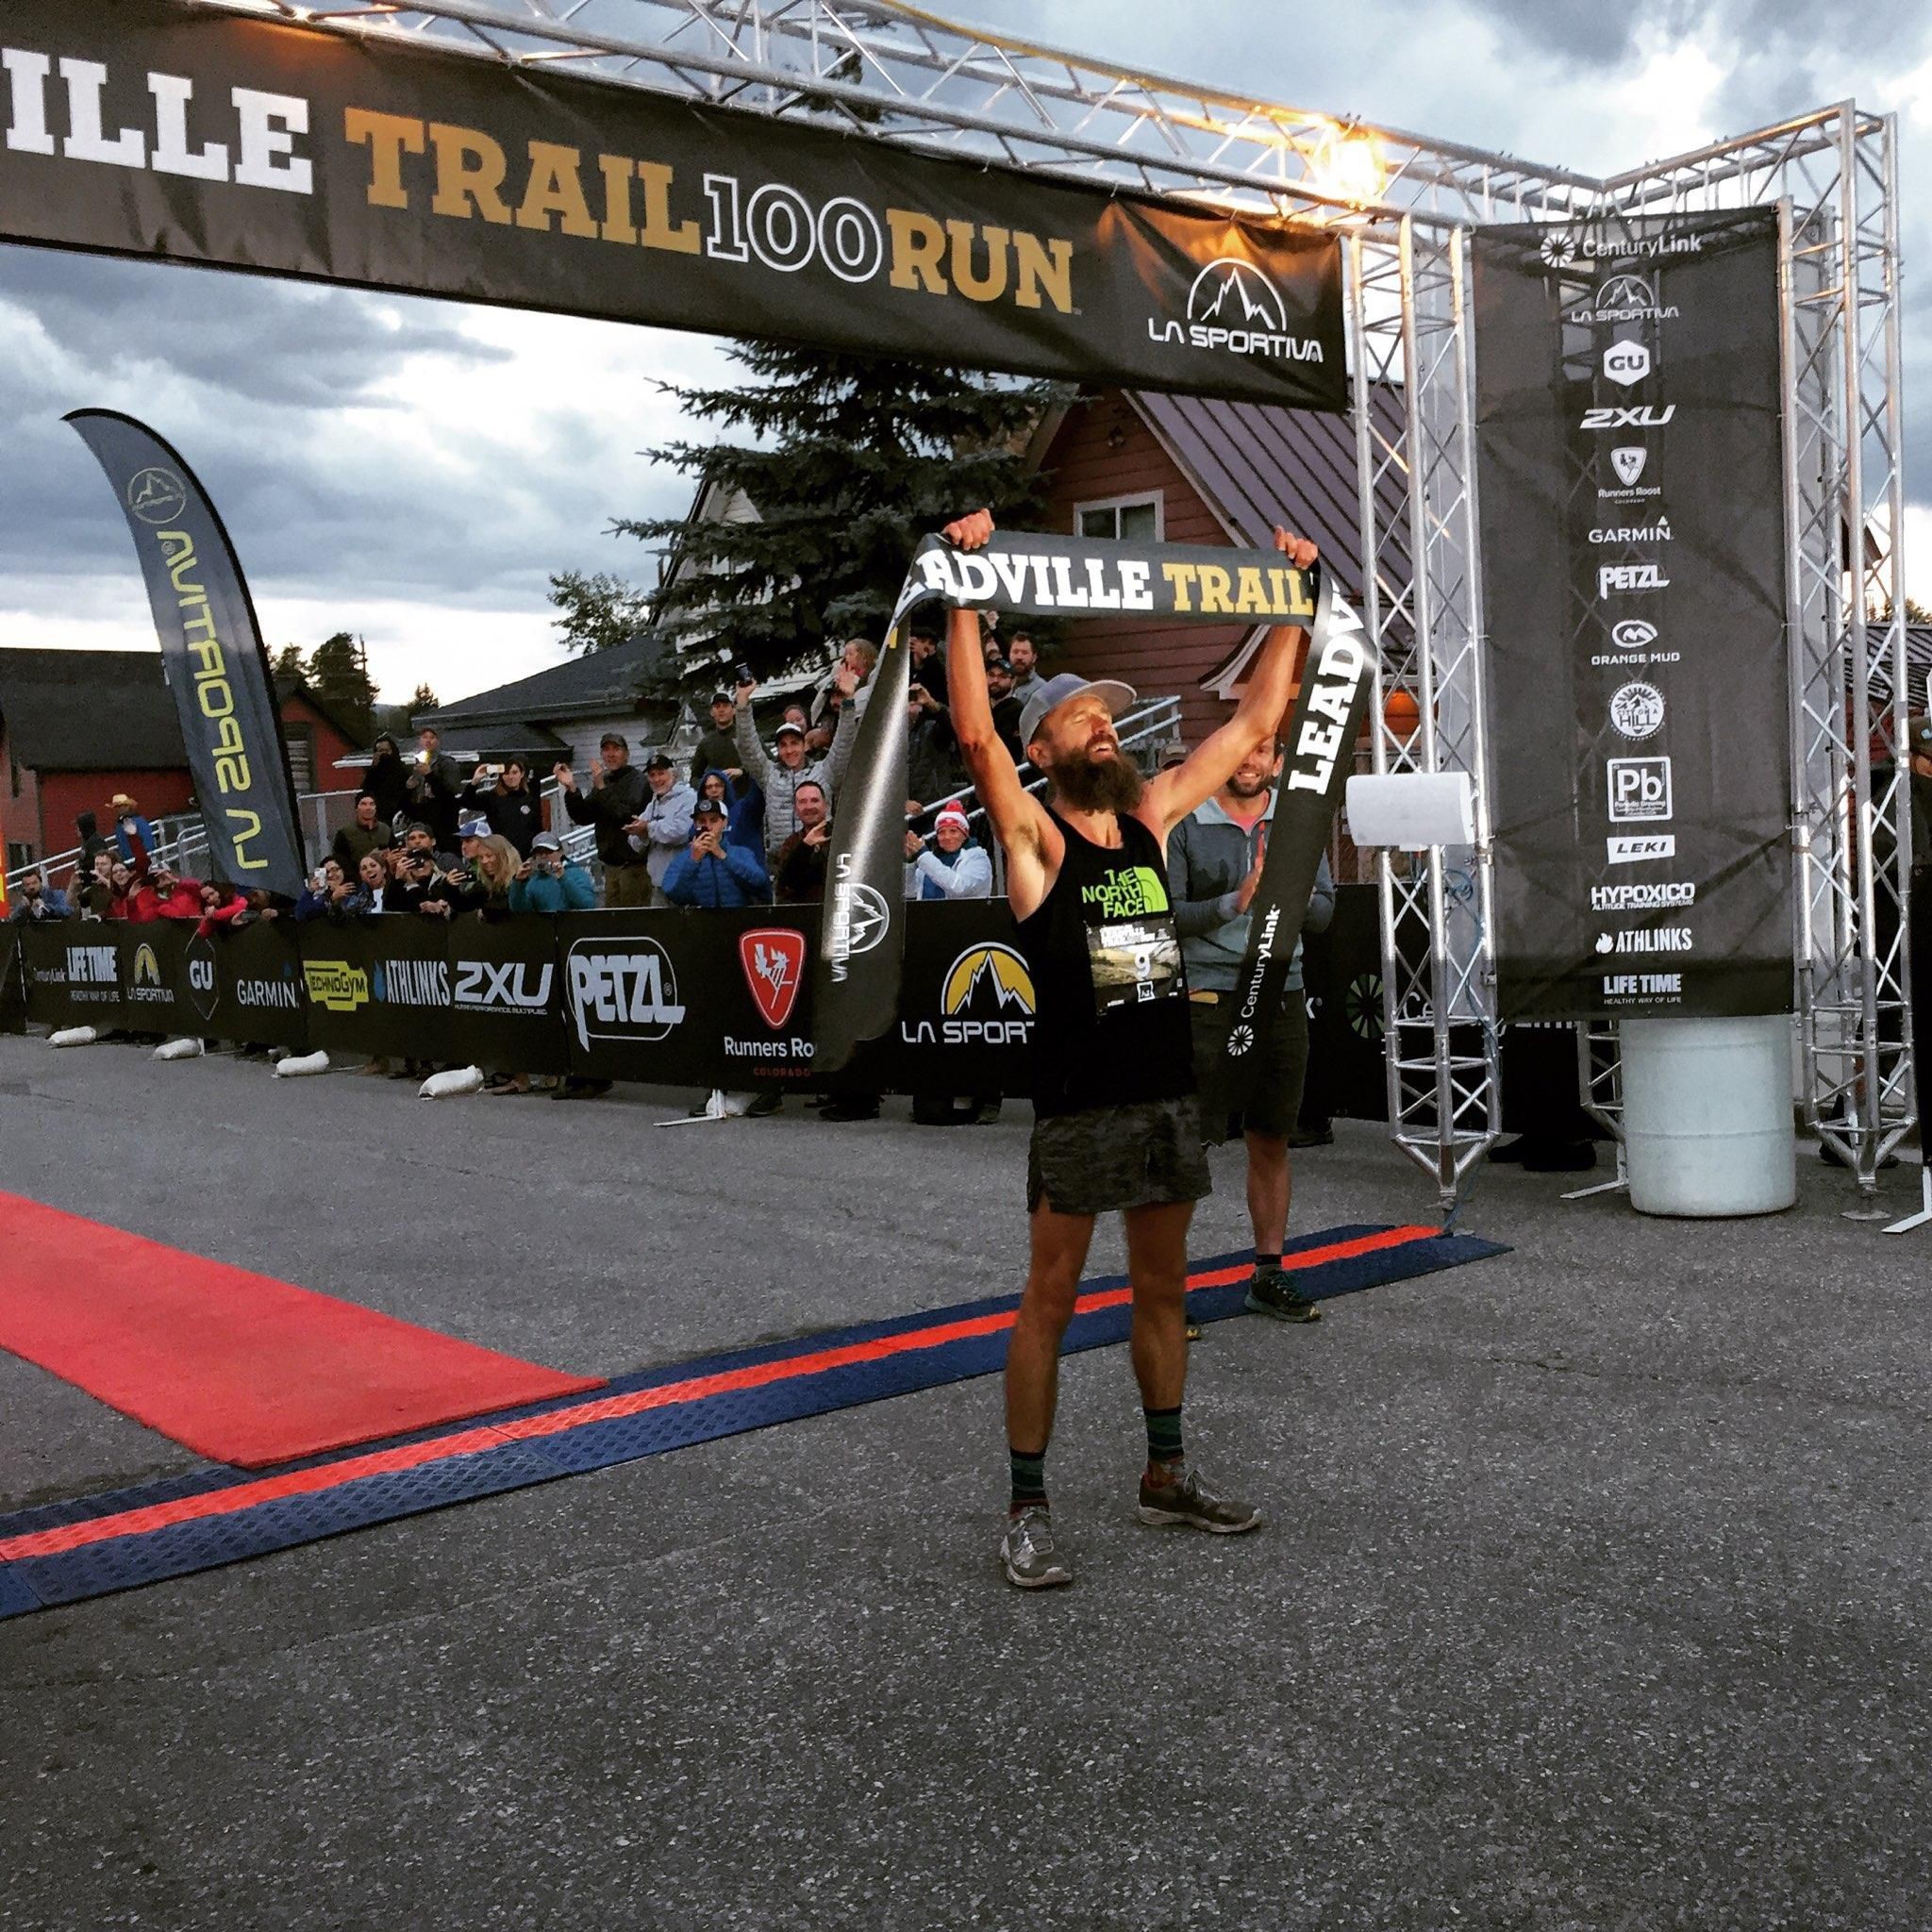 Krar returned to Leadville 100 for his second win with over a hour ahead of second place 